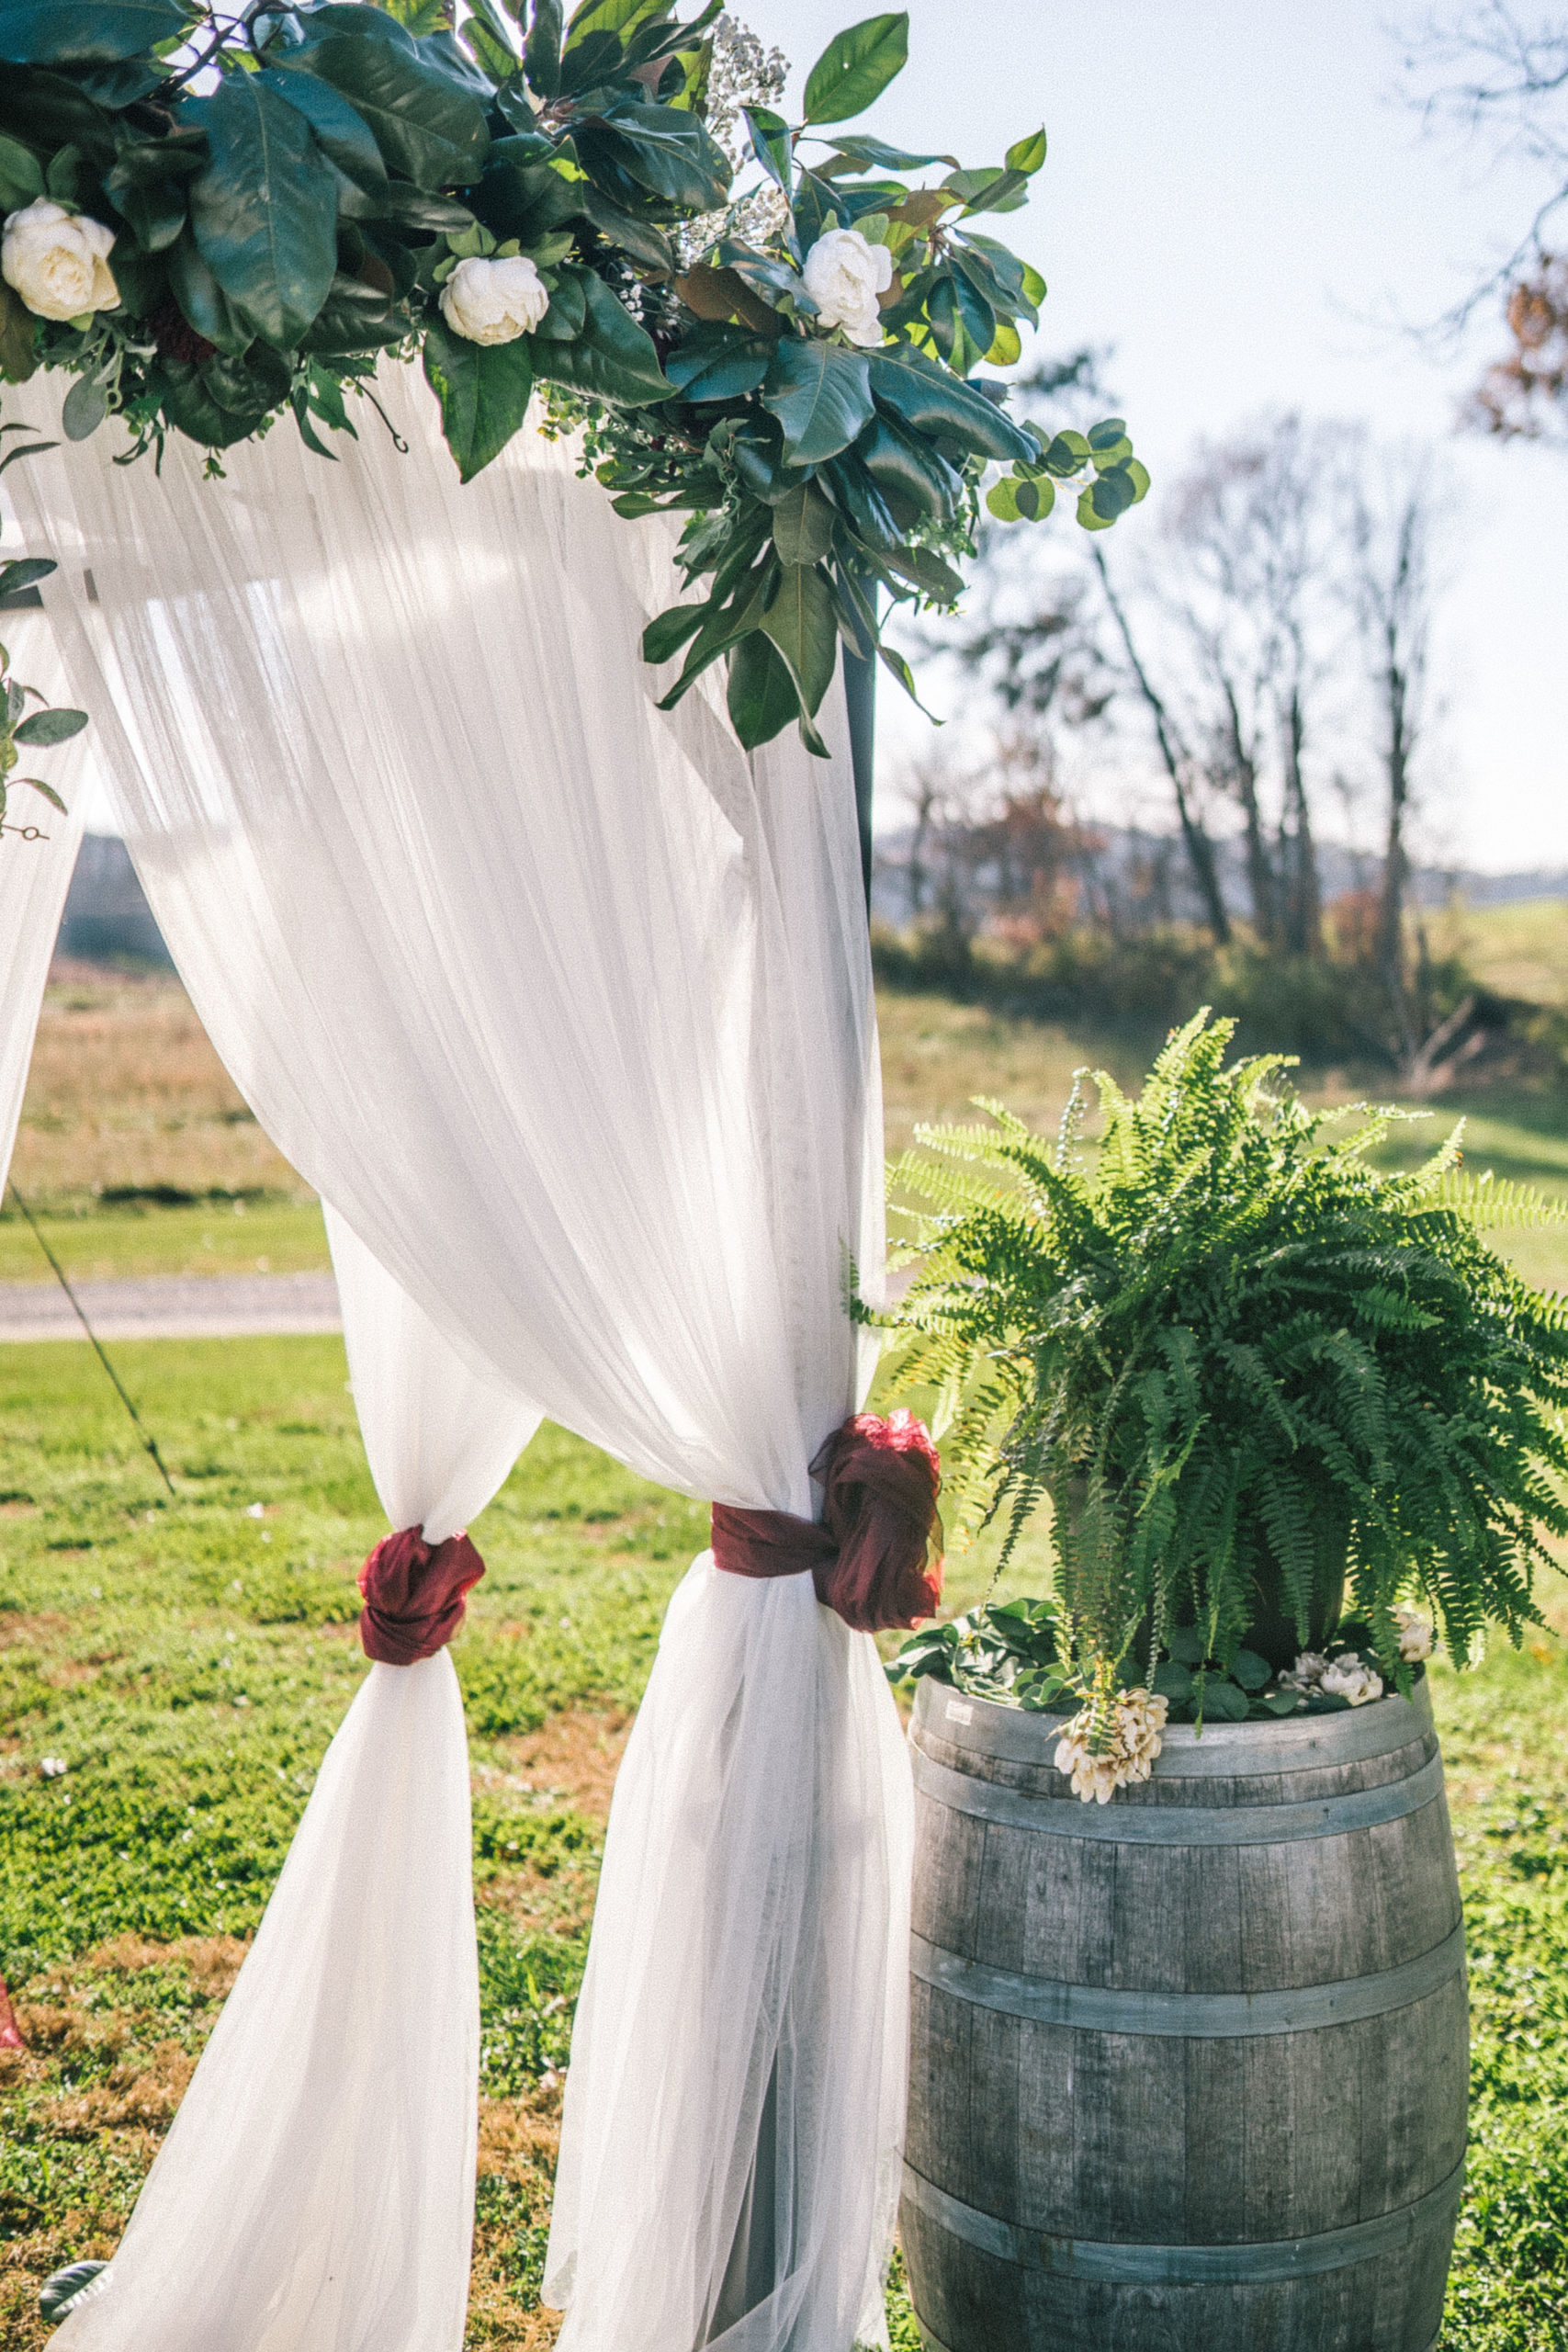 beautiful white draping for a wedding arch for a classy outdoor wedding decor